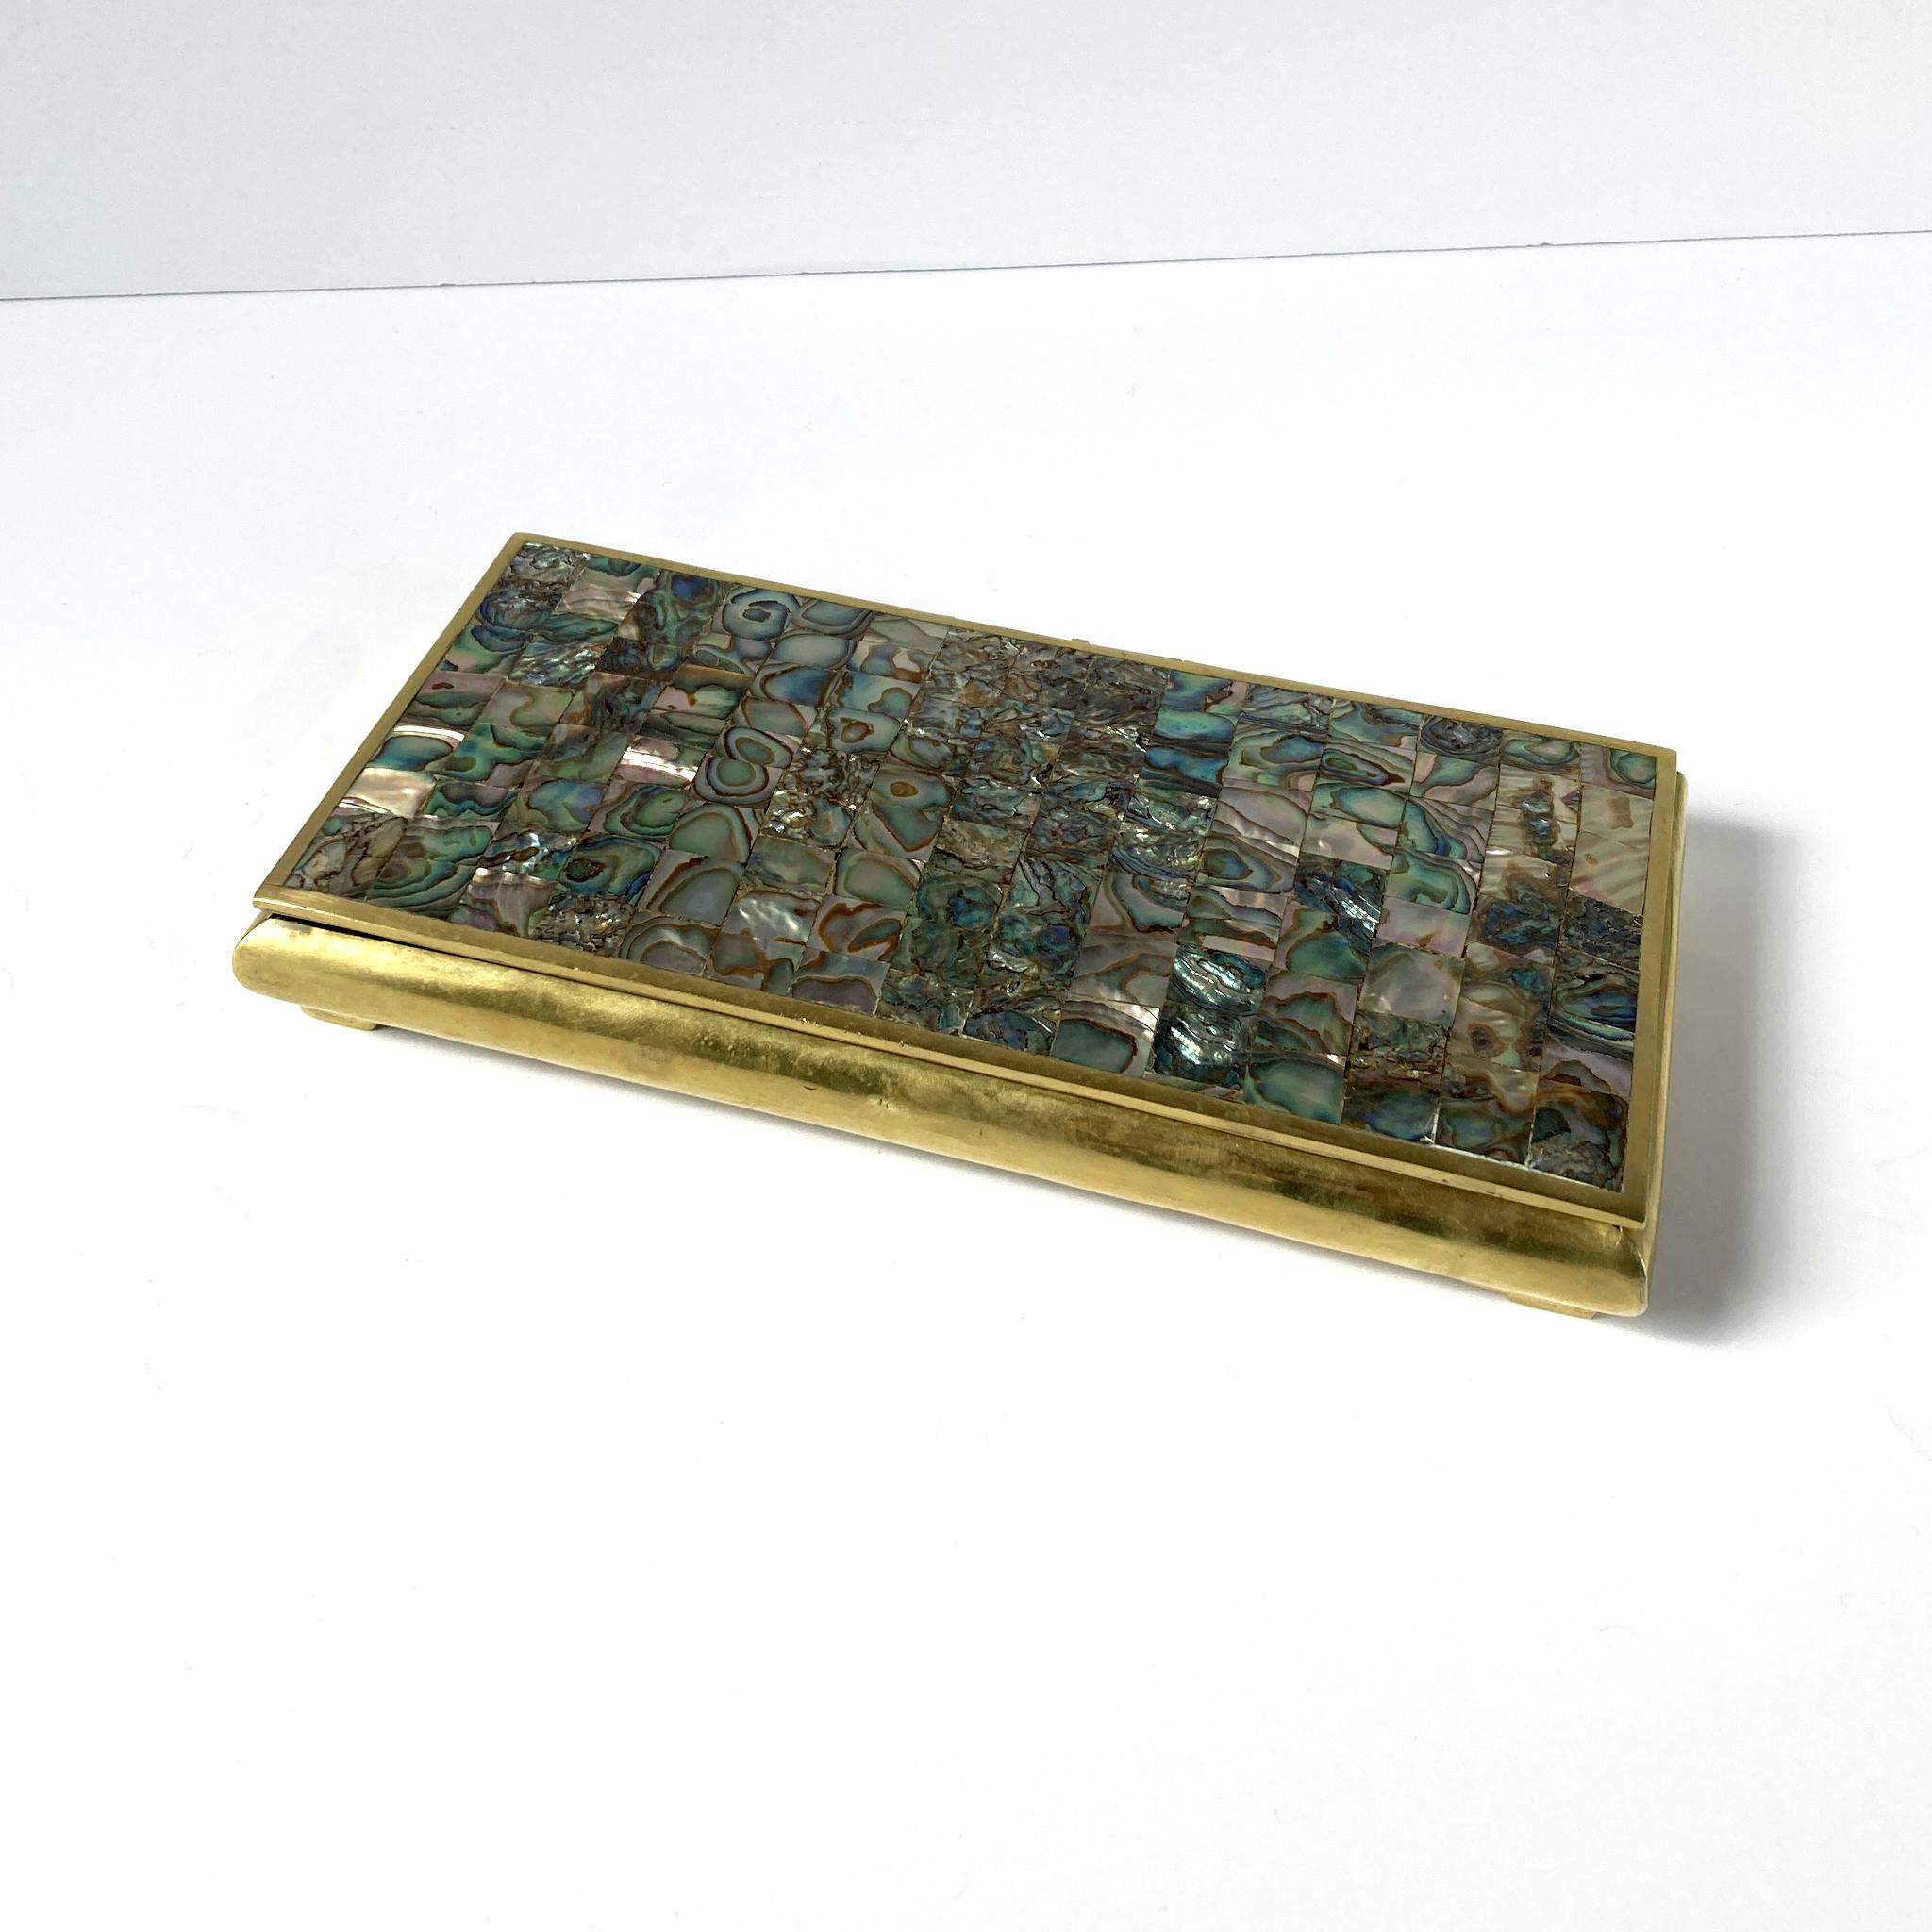 Hand-Crafted Midcentury Hinged Abalone Shell and Brass Box, Mosaic Pattern on Lid, Wood-lined For Sale